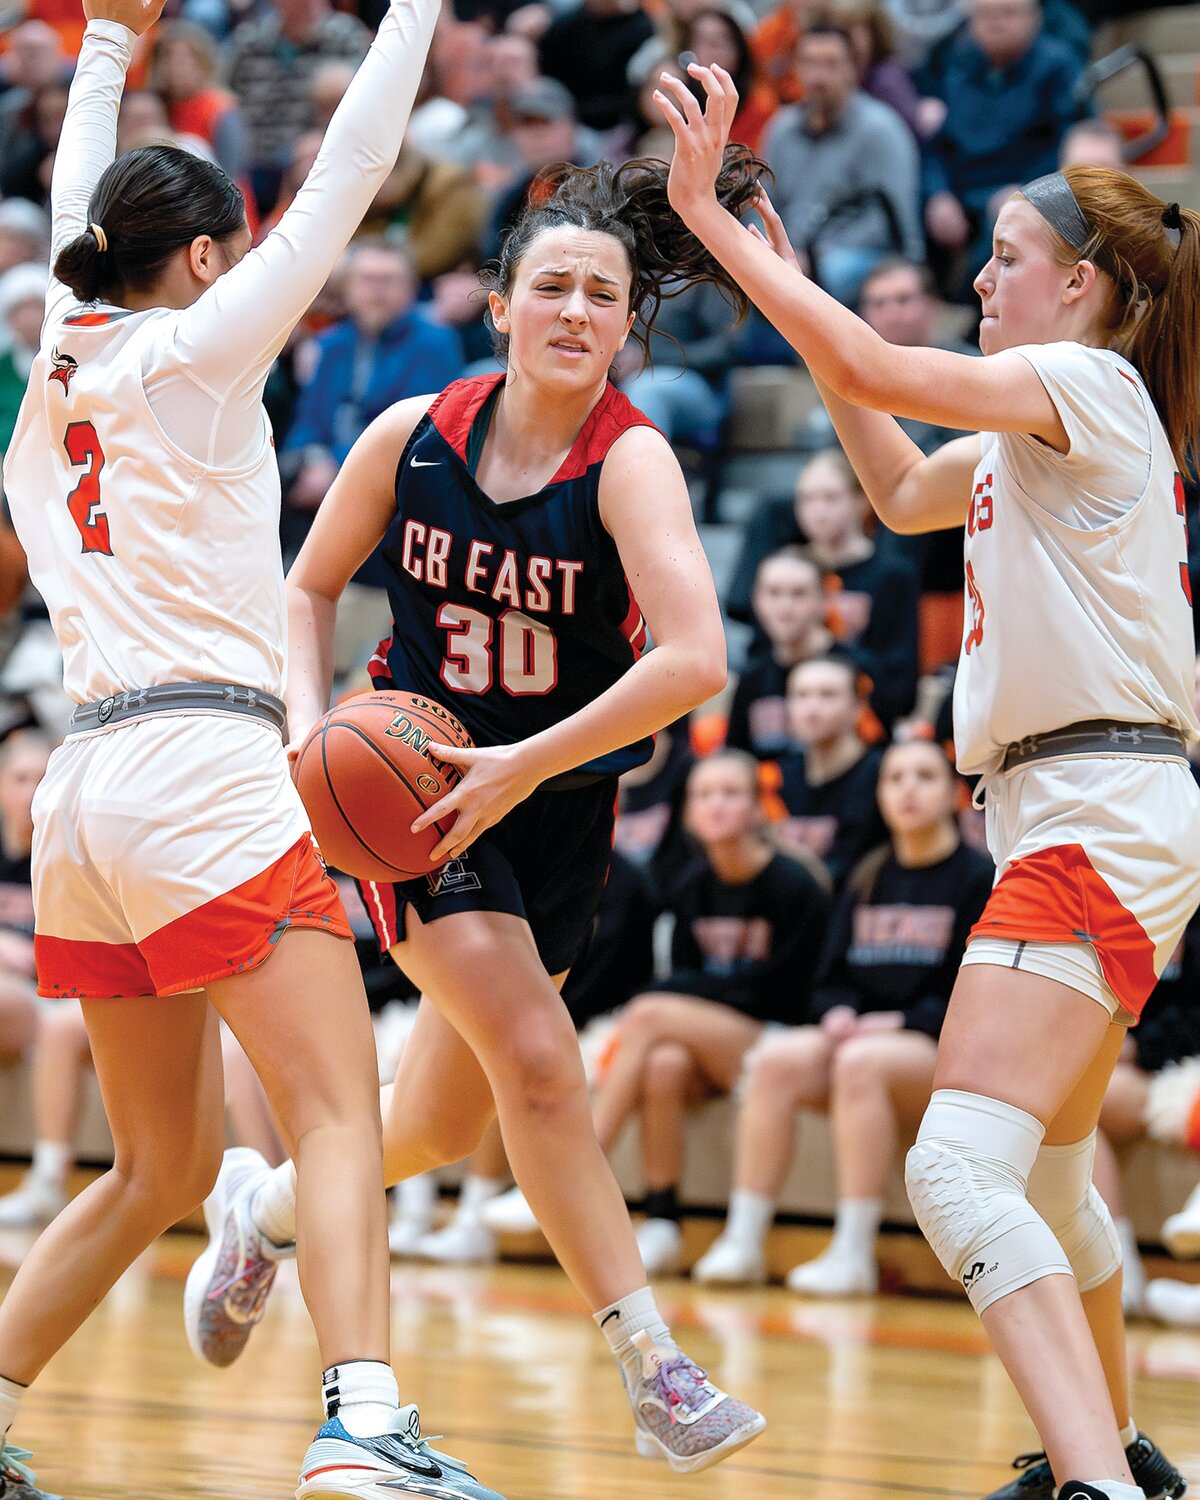 Central Bucks East’s Anna Barry gets fouled while driving through the double team of Perkiomen Valley’s Bella Bacani and Grace Galbavy. Barry would make the second of two free throws for her 1,000th career point.